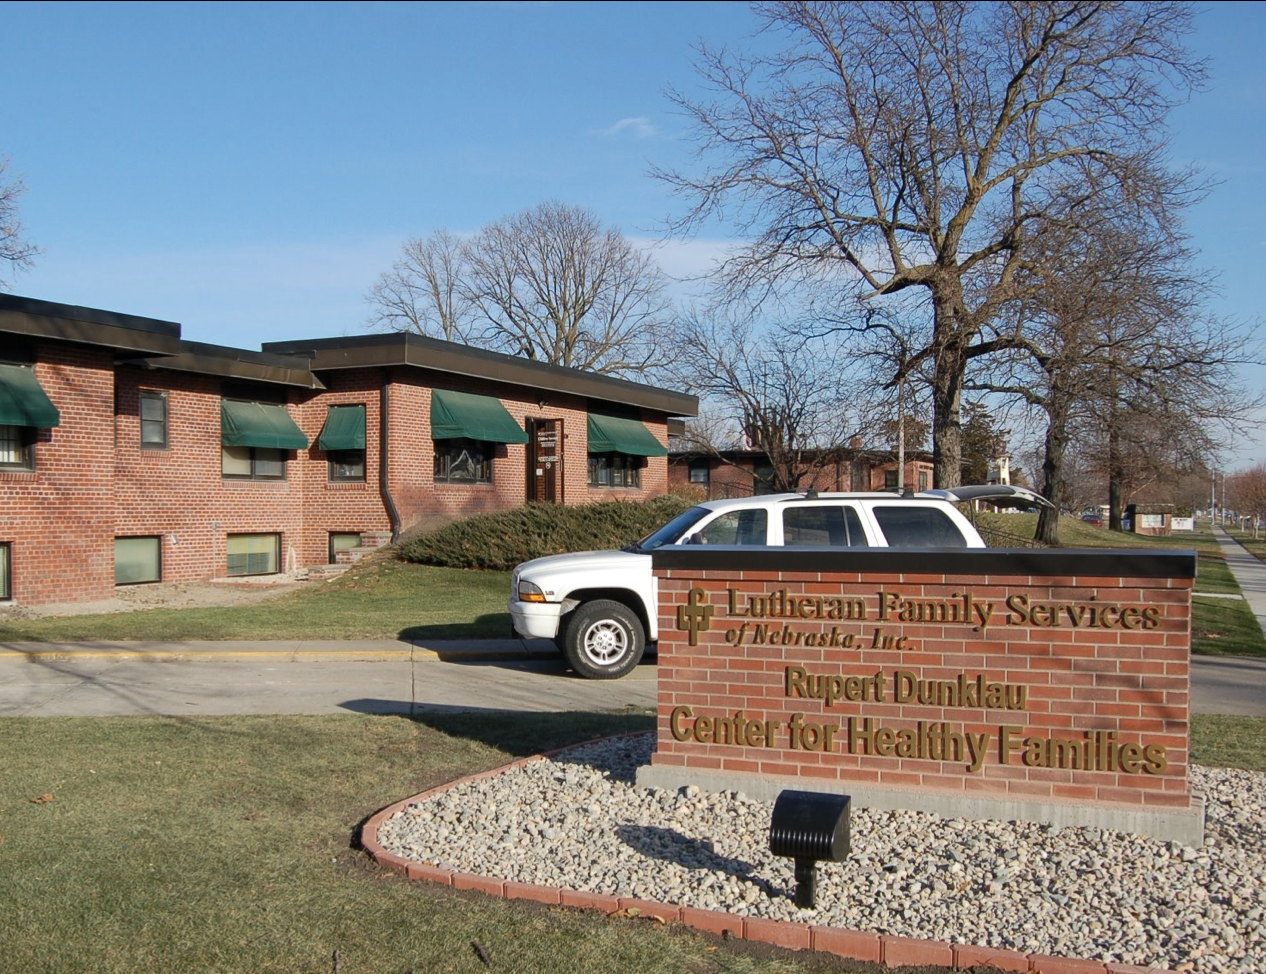 Dunklau Center for Healthy Families